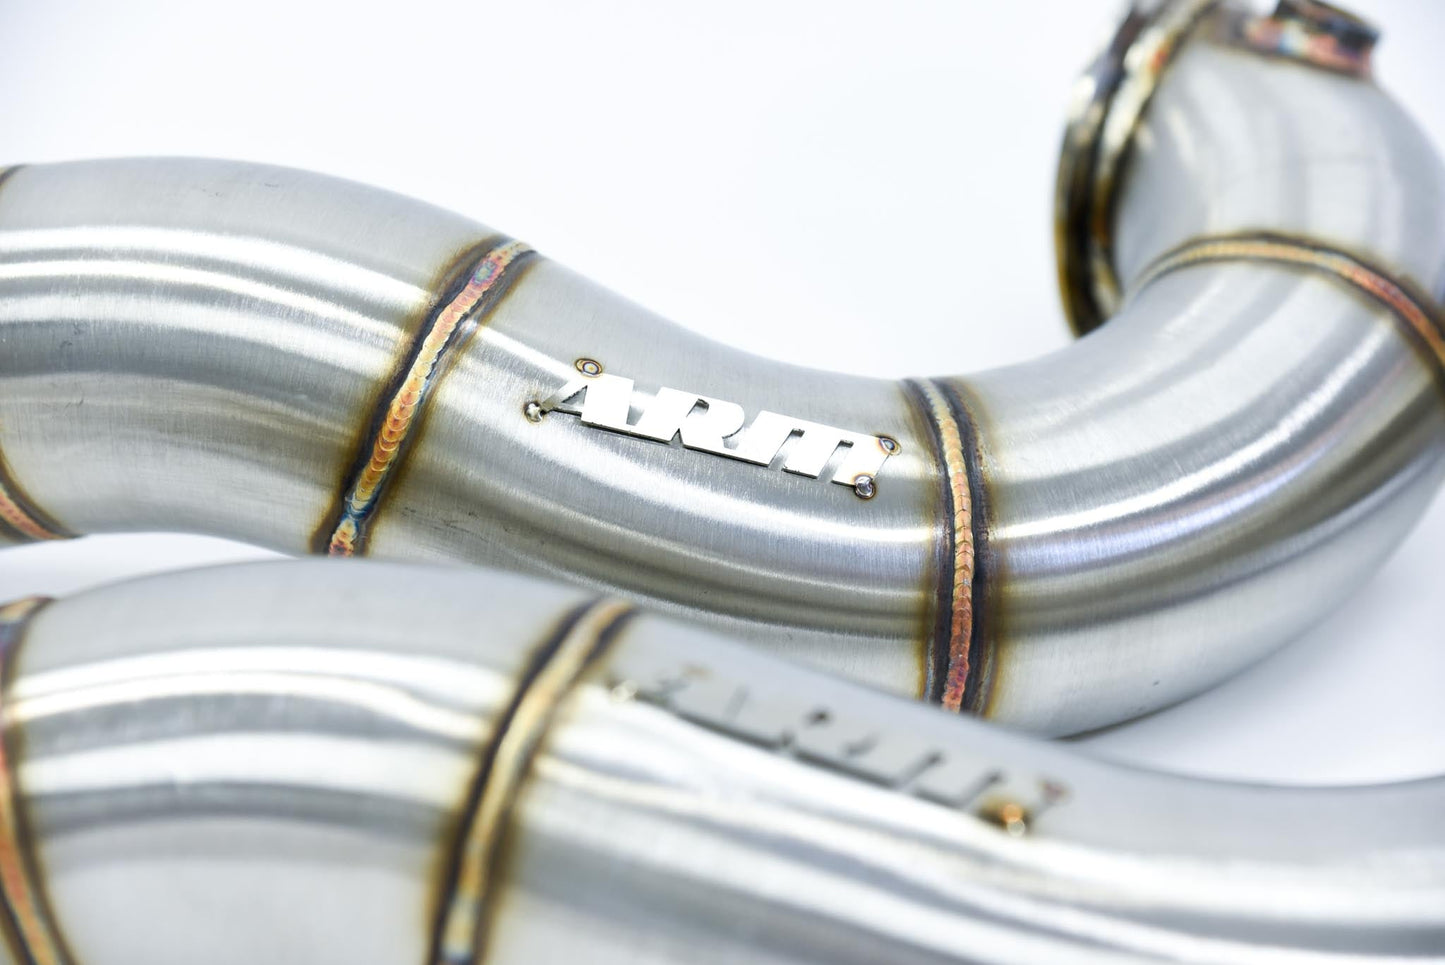 BMW 135i N54 3" CATLESS DOWNPIPES - ARM Motorsports